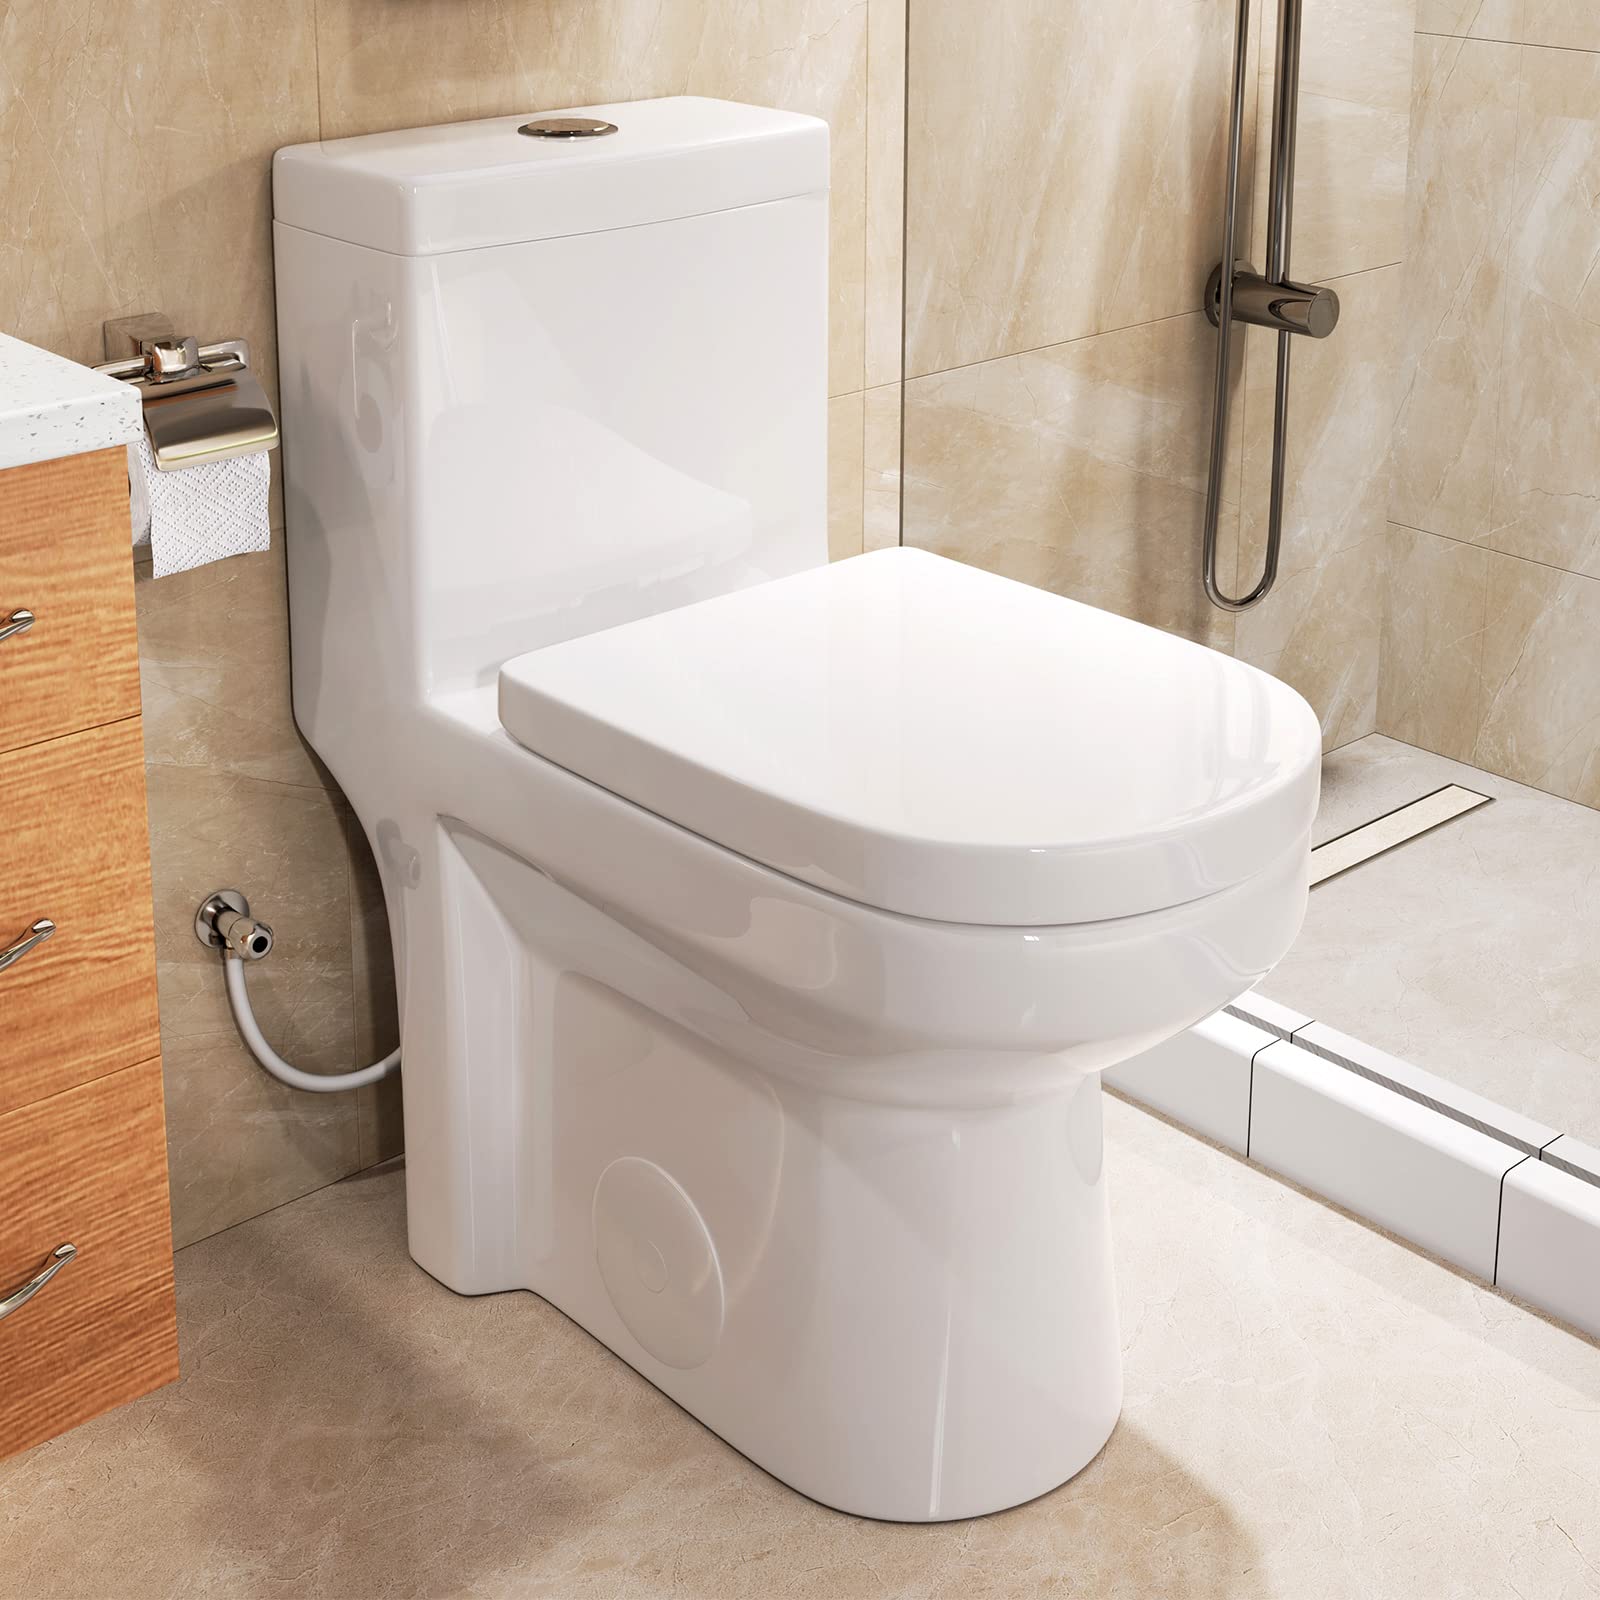 HOROW HWMT-8733 Small Compact One Piece Toilet